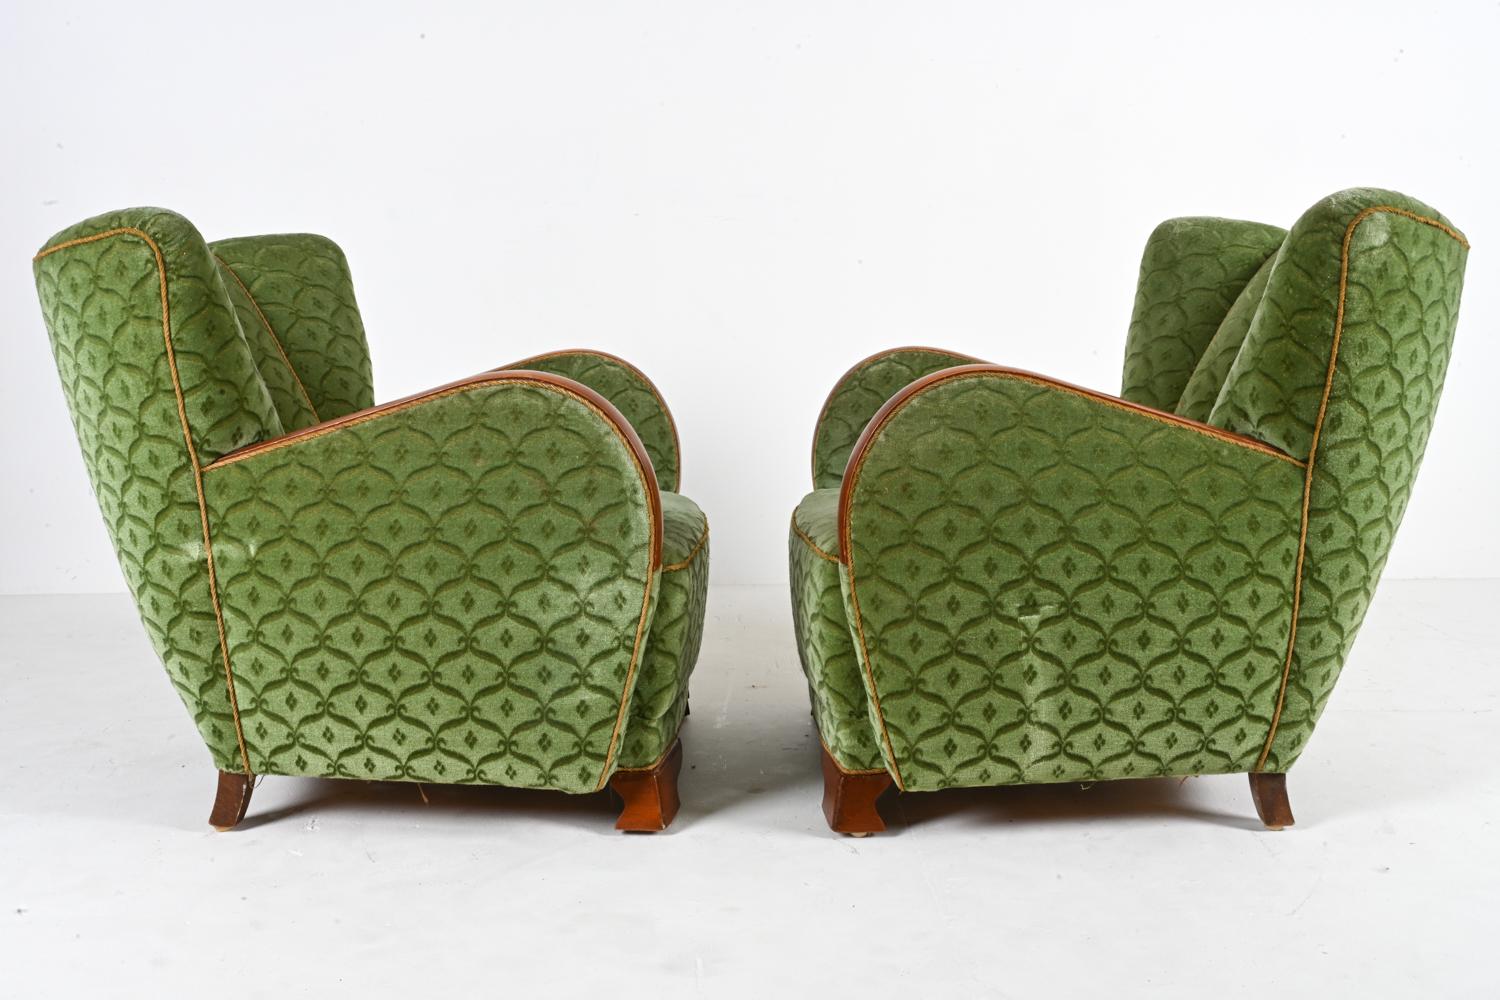 Pair of Mogens Lassen Style Danish Midcentury Lounge or Club Chairs, 1940s For Sale 11